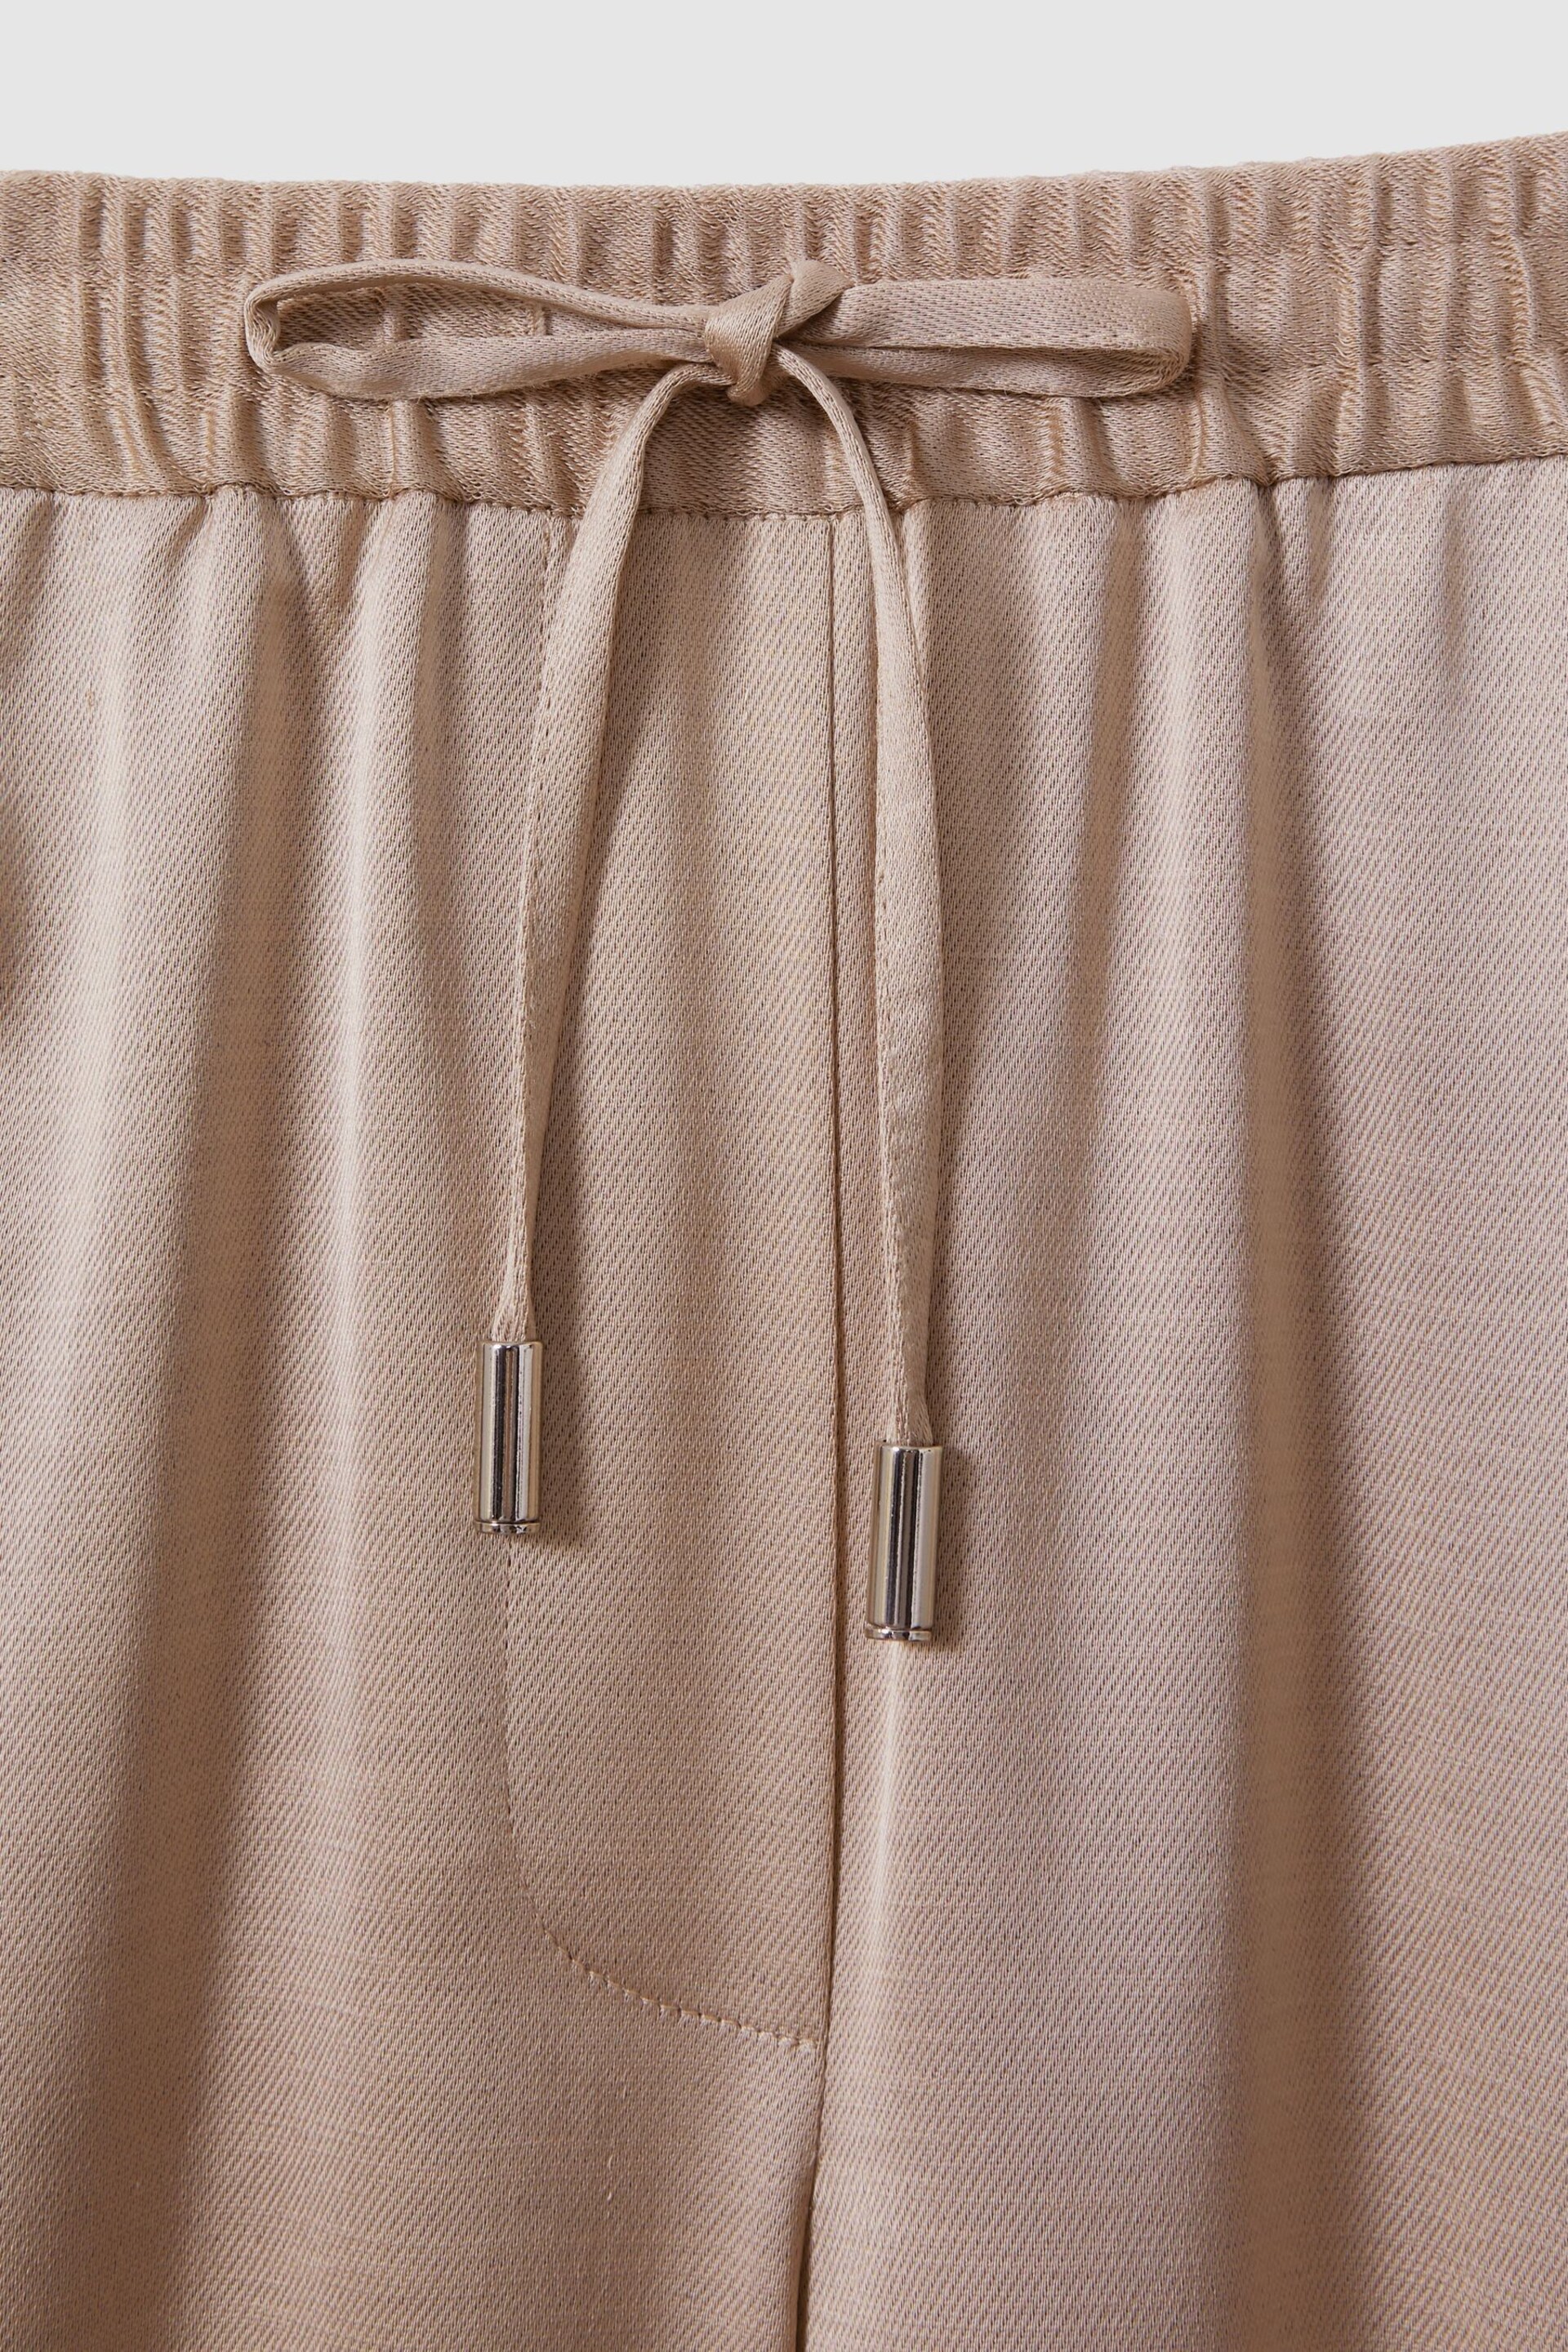 Reiss Gold Cole Satin Drawstring Wide Leg Trousers - Image 5 of 5